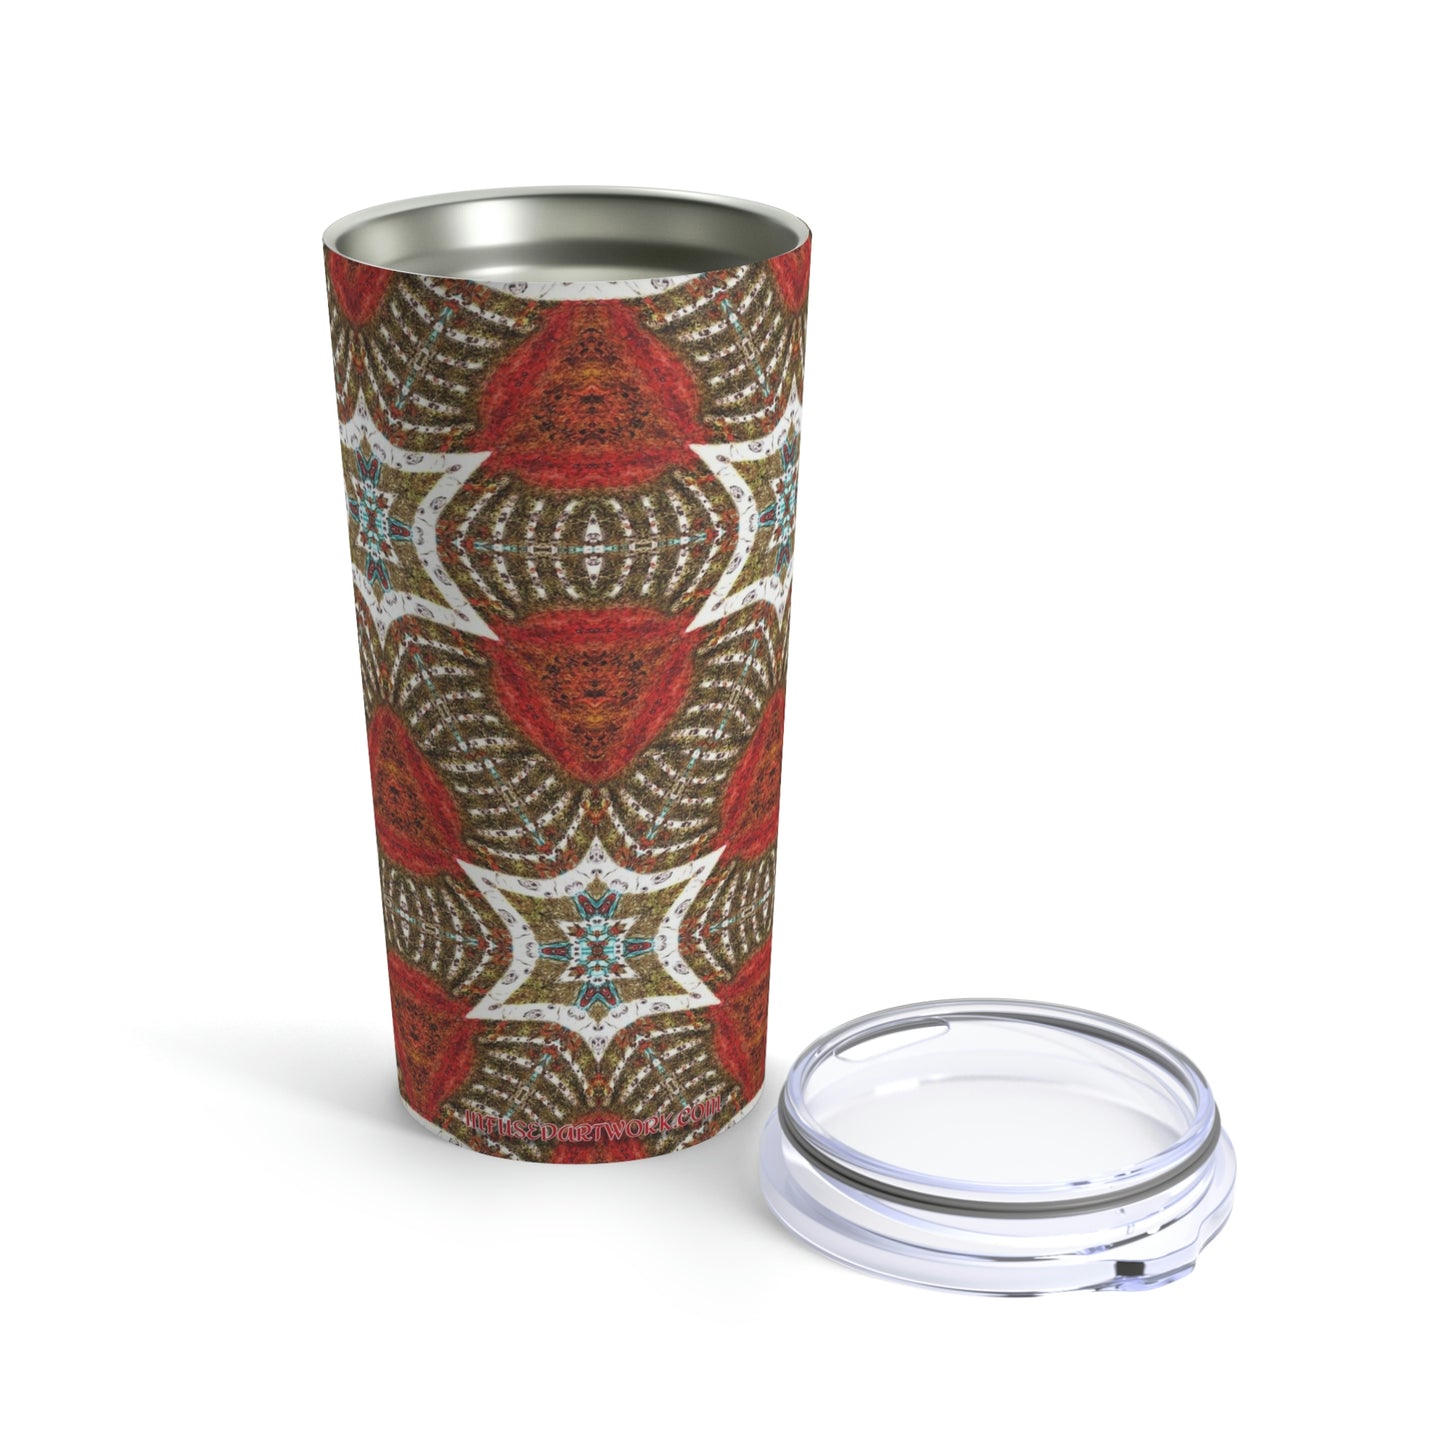 Sweater Cozy - Stainless Steel Coffee Tumbler